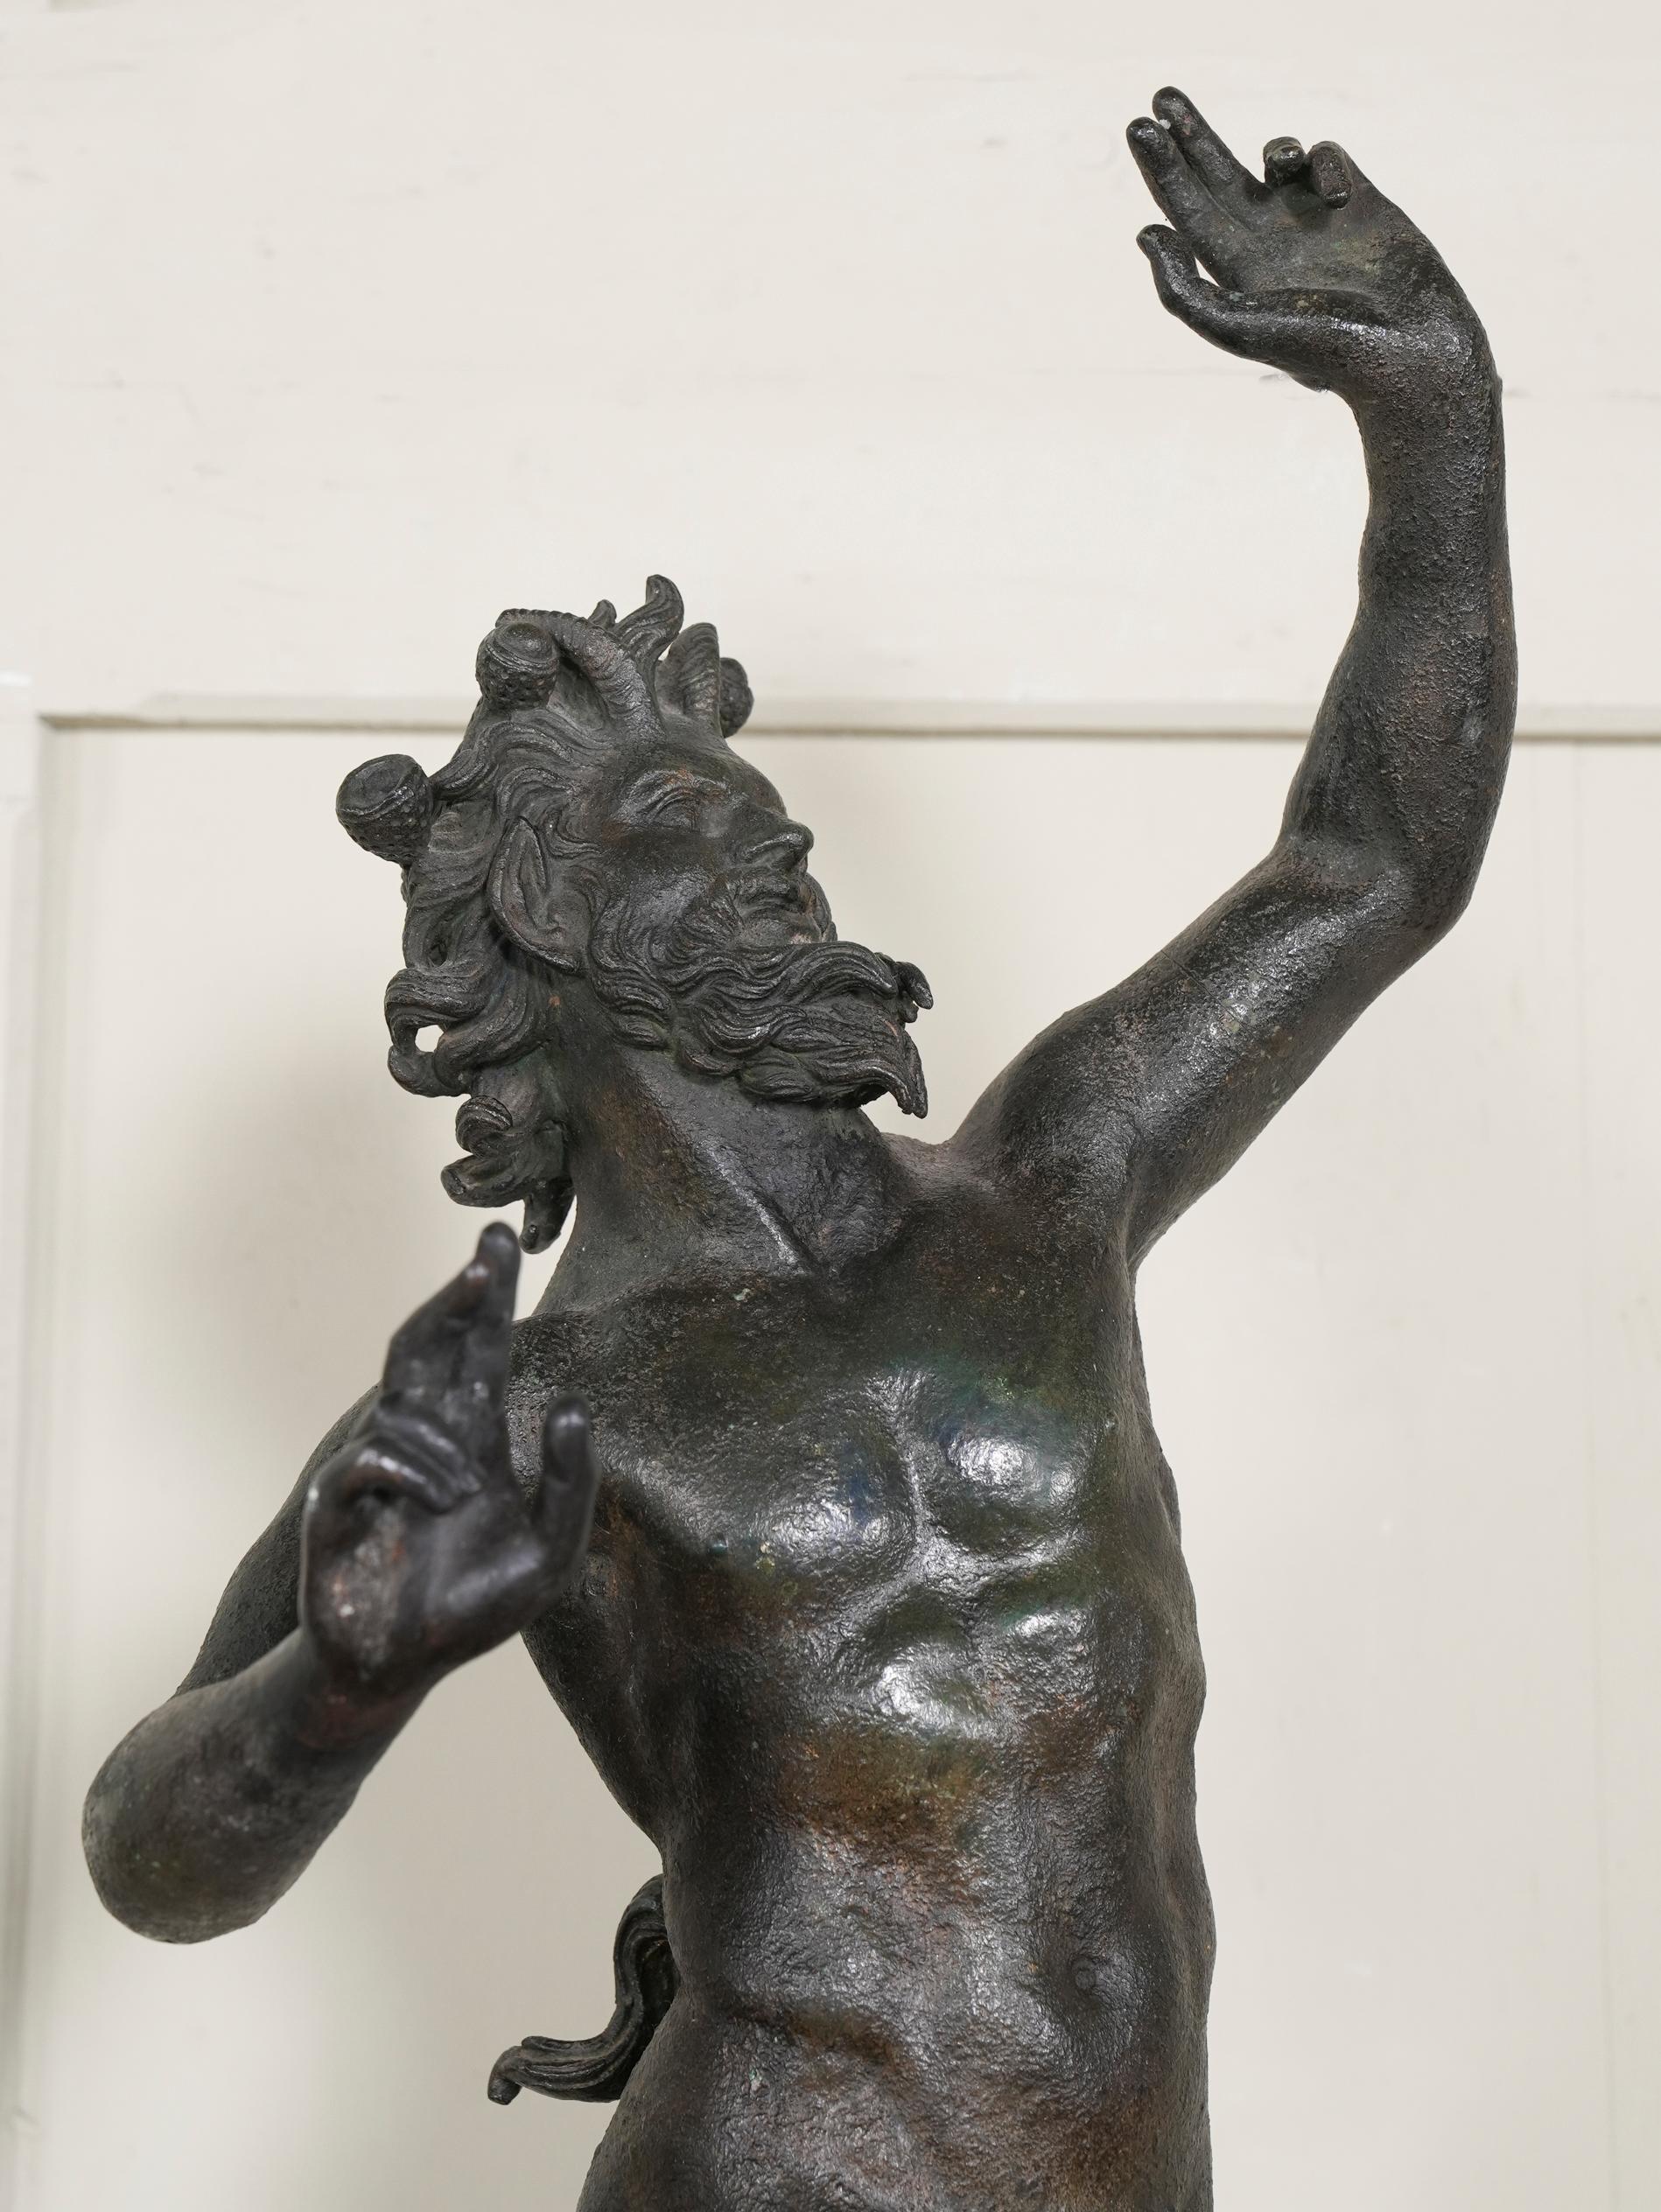 The large bronze figure of exceptional quality, colour and surface patination.

Signed to the base 